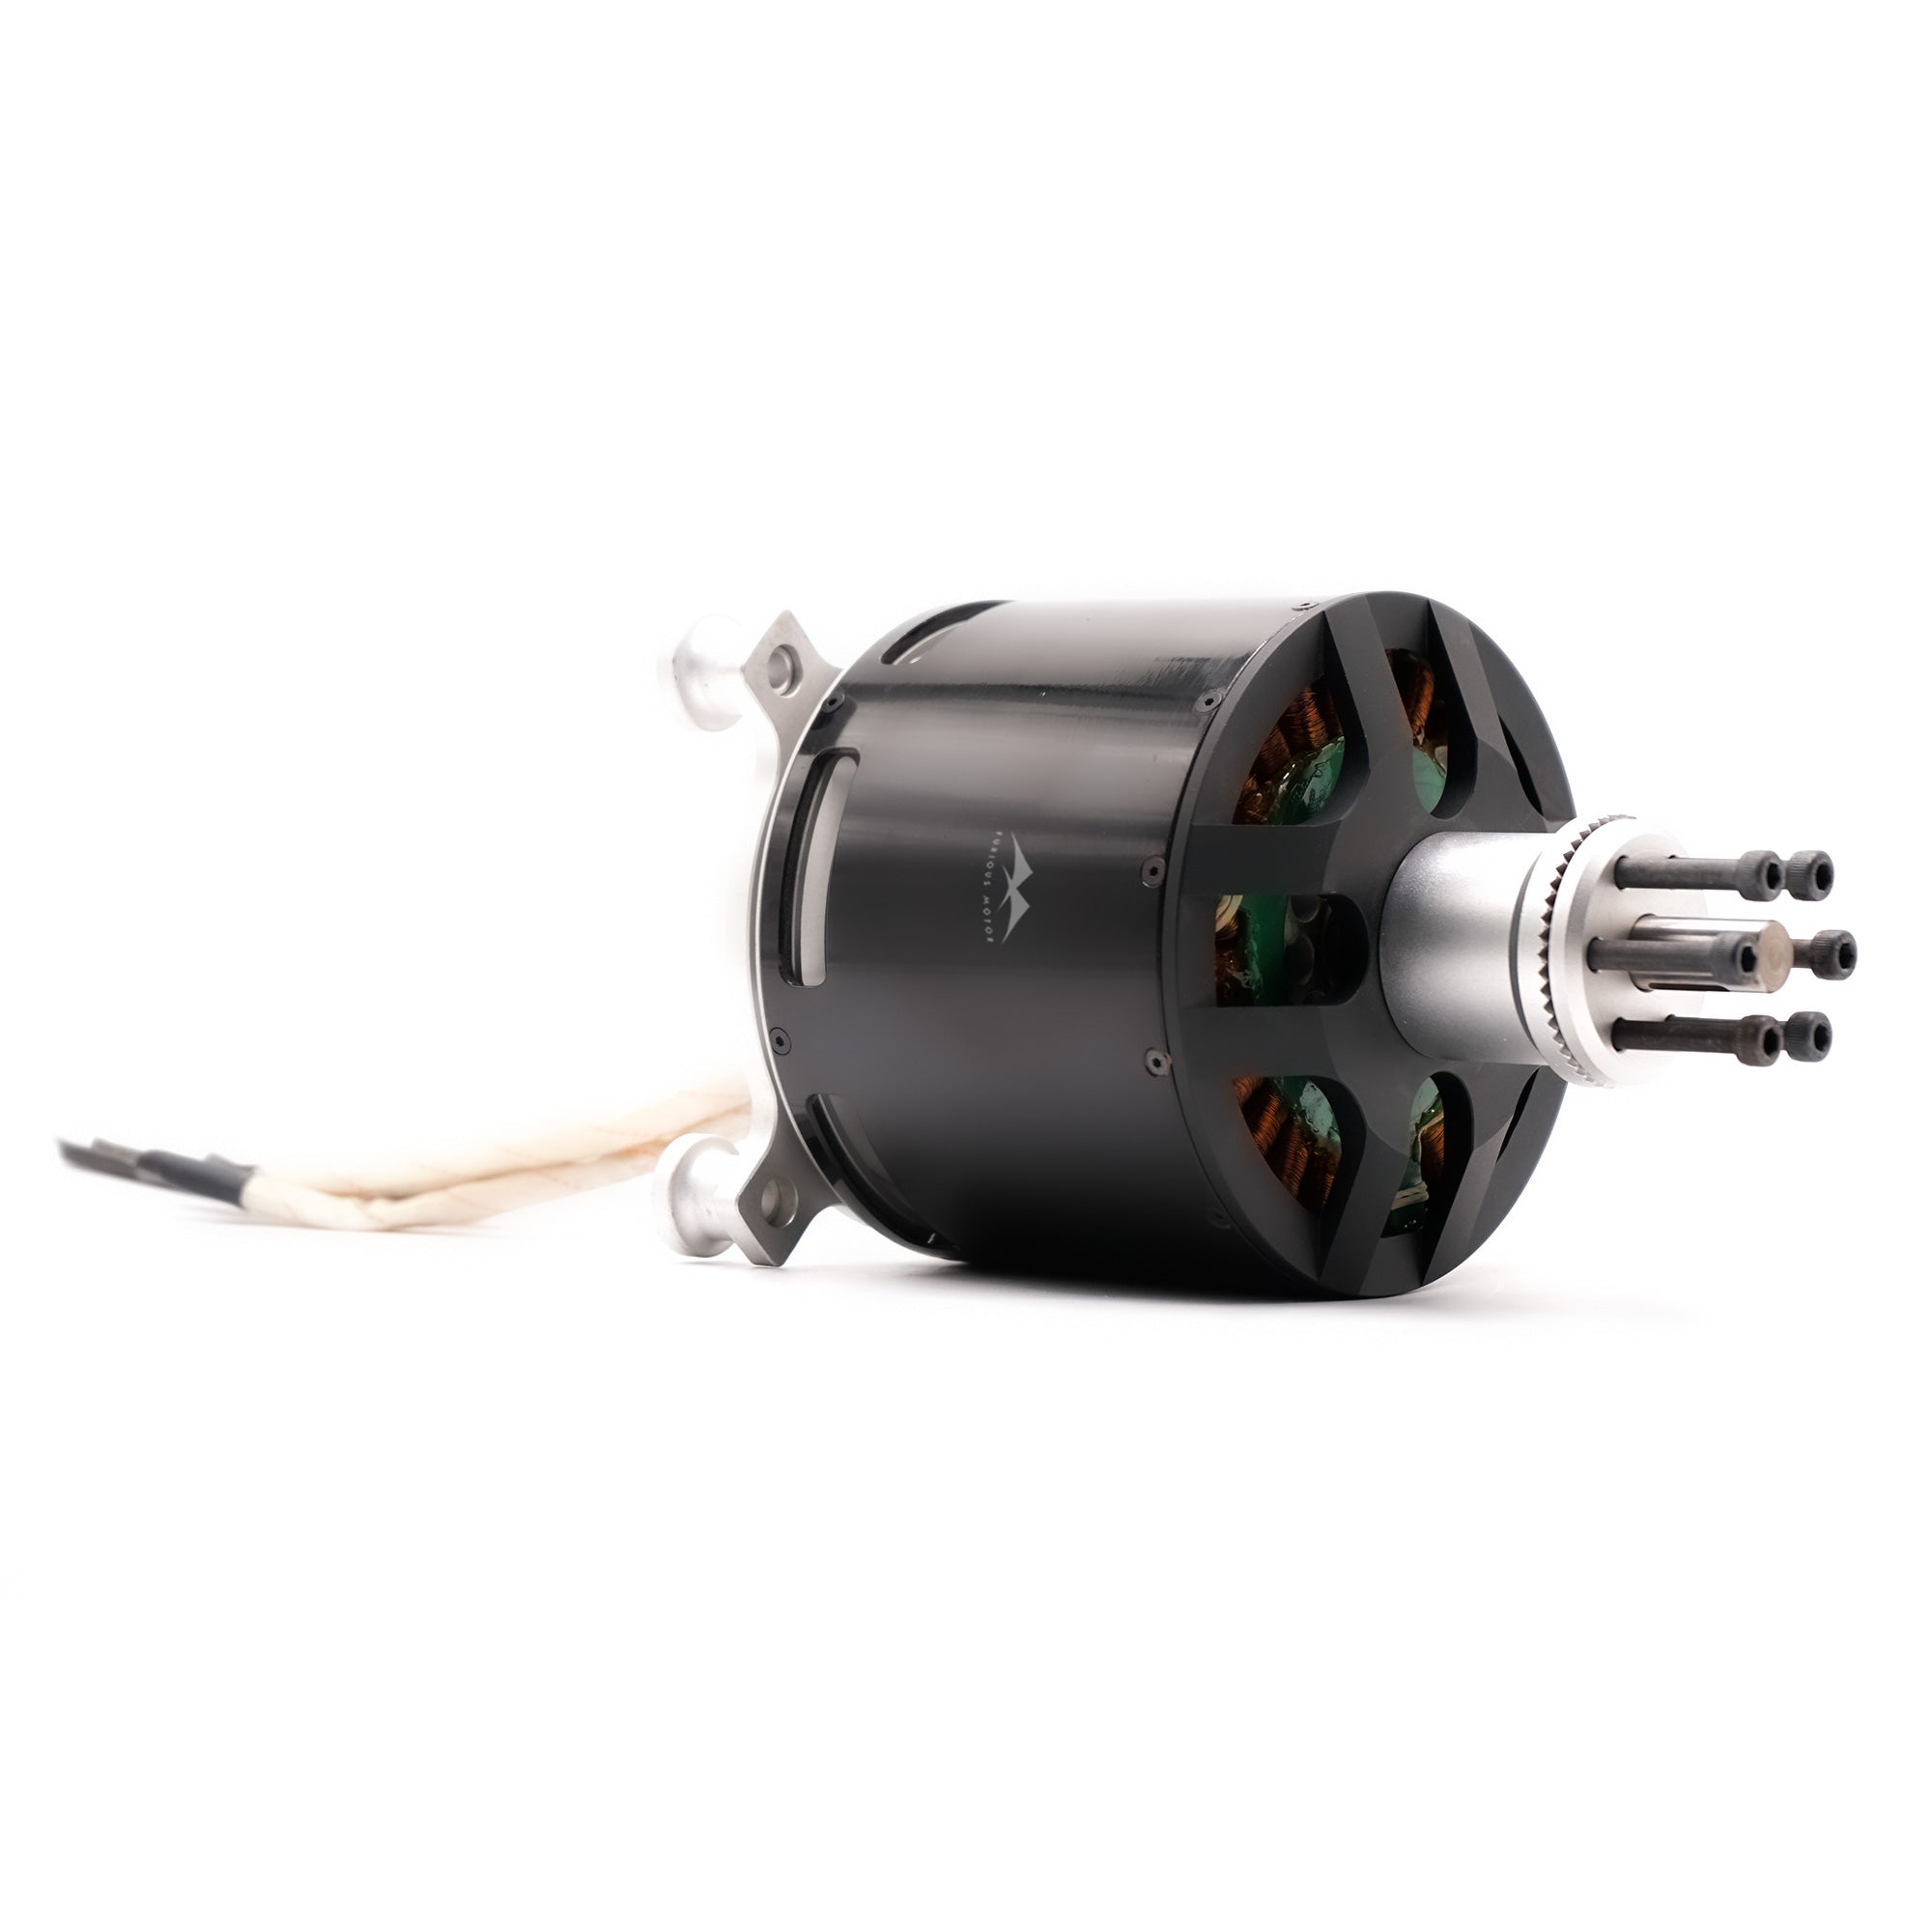 120100 61KG Thrust BLDC Motor with ESC and Propeller for Large Drone Heavy Lift Drone